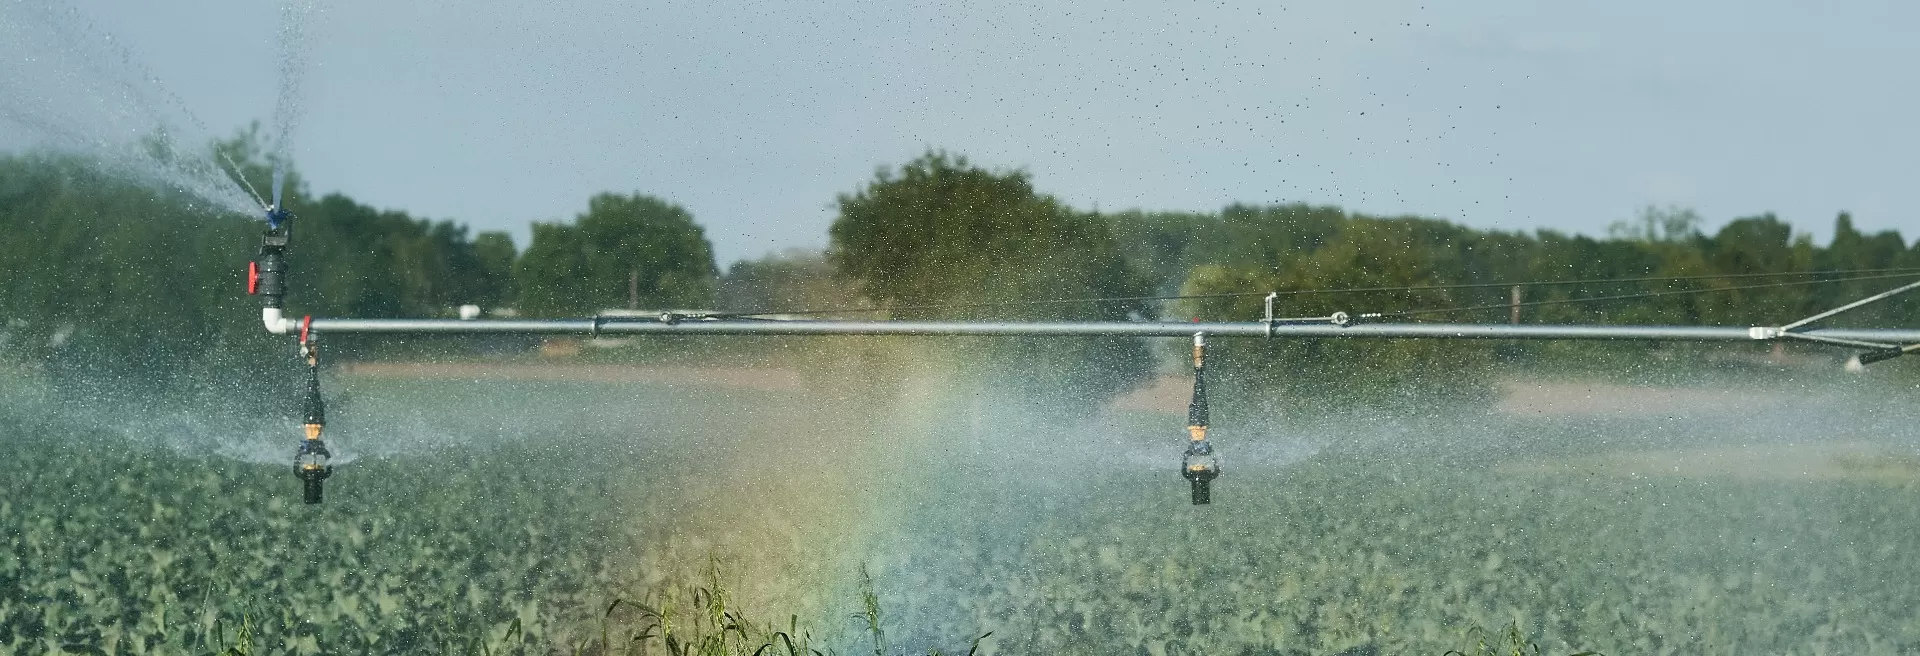 Agricultural irrigator watering crops